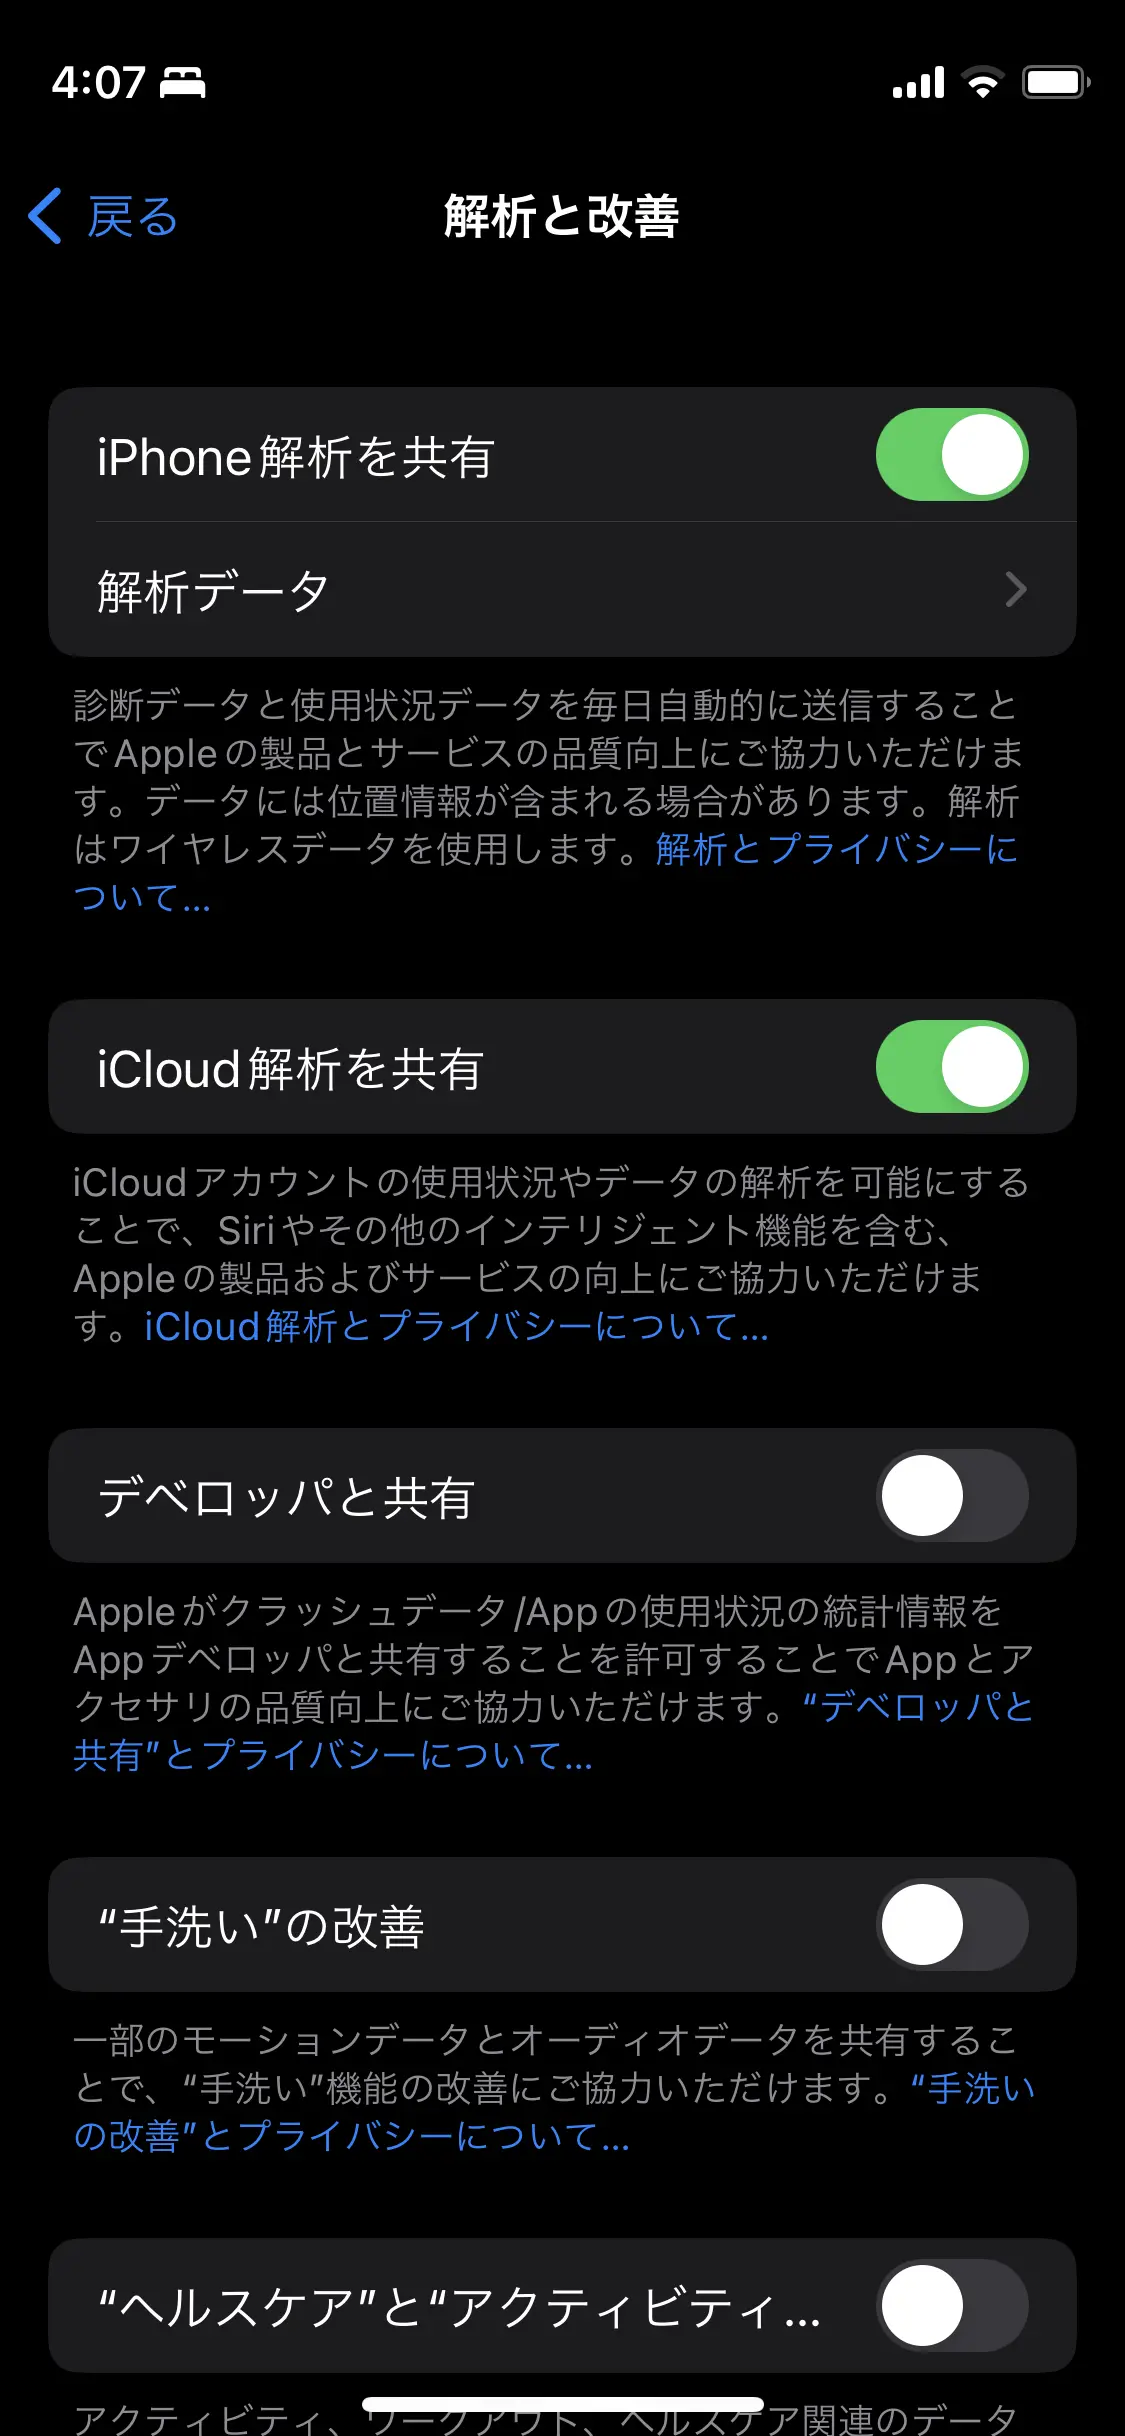 iPhoneの充電回数の確認方法。